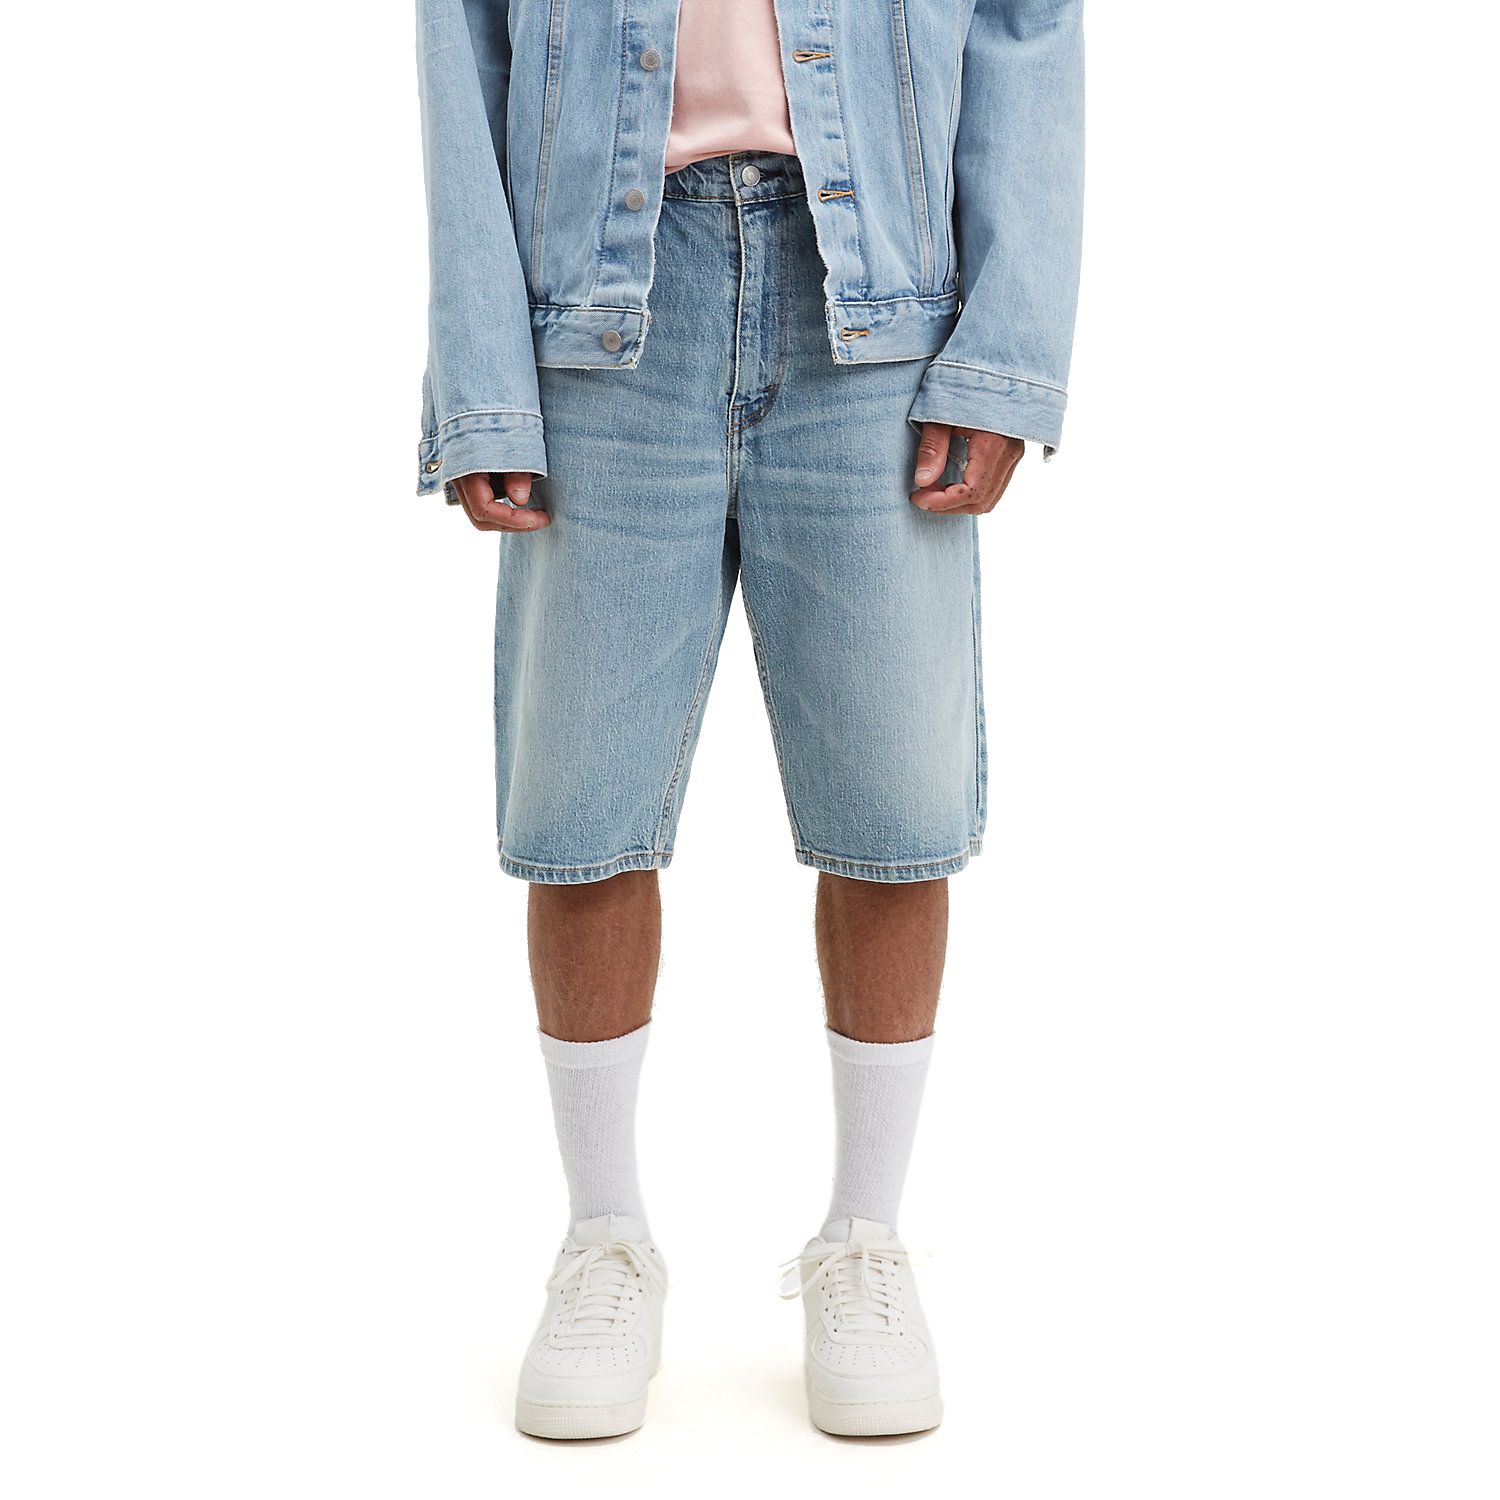 levis 569 big and tall shorts